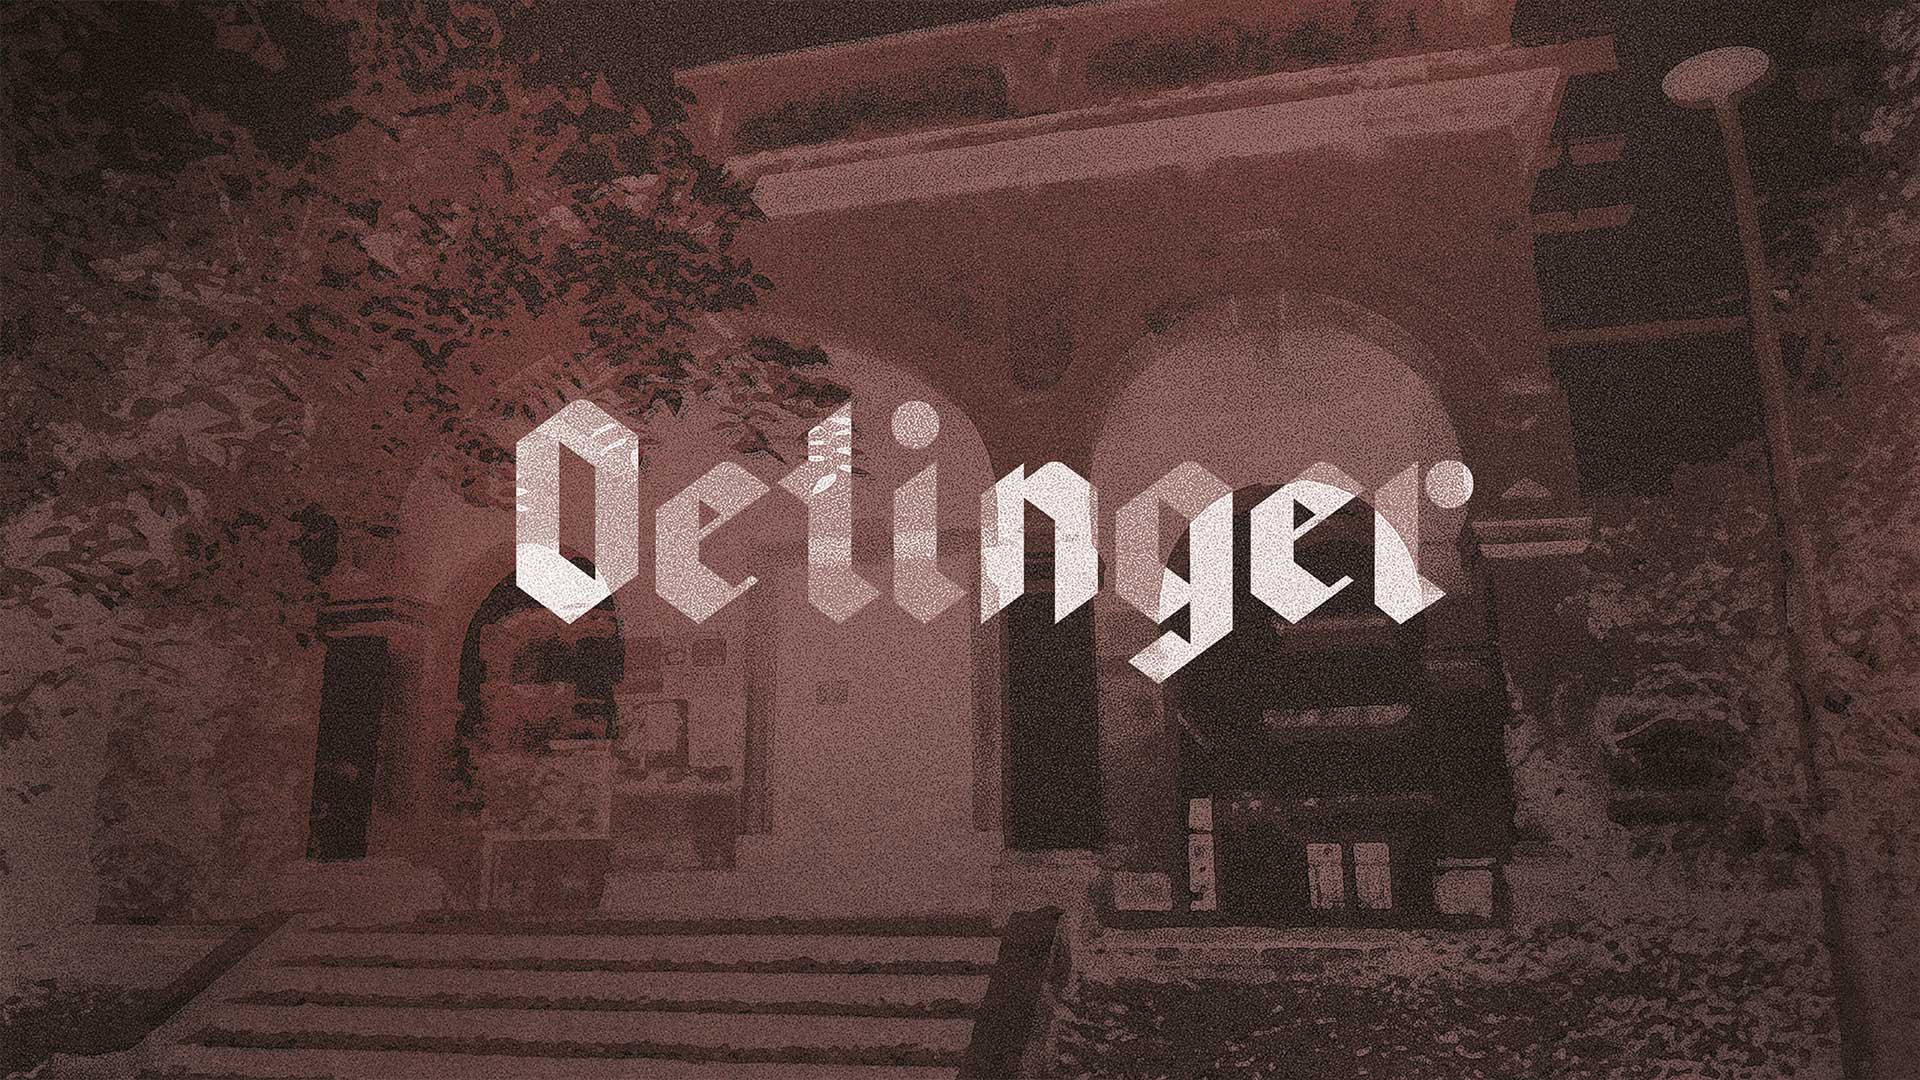 Mitch Hopkins | Design | Oetinger typeface, designed in collaboration with Max Littledale